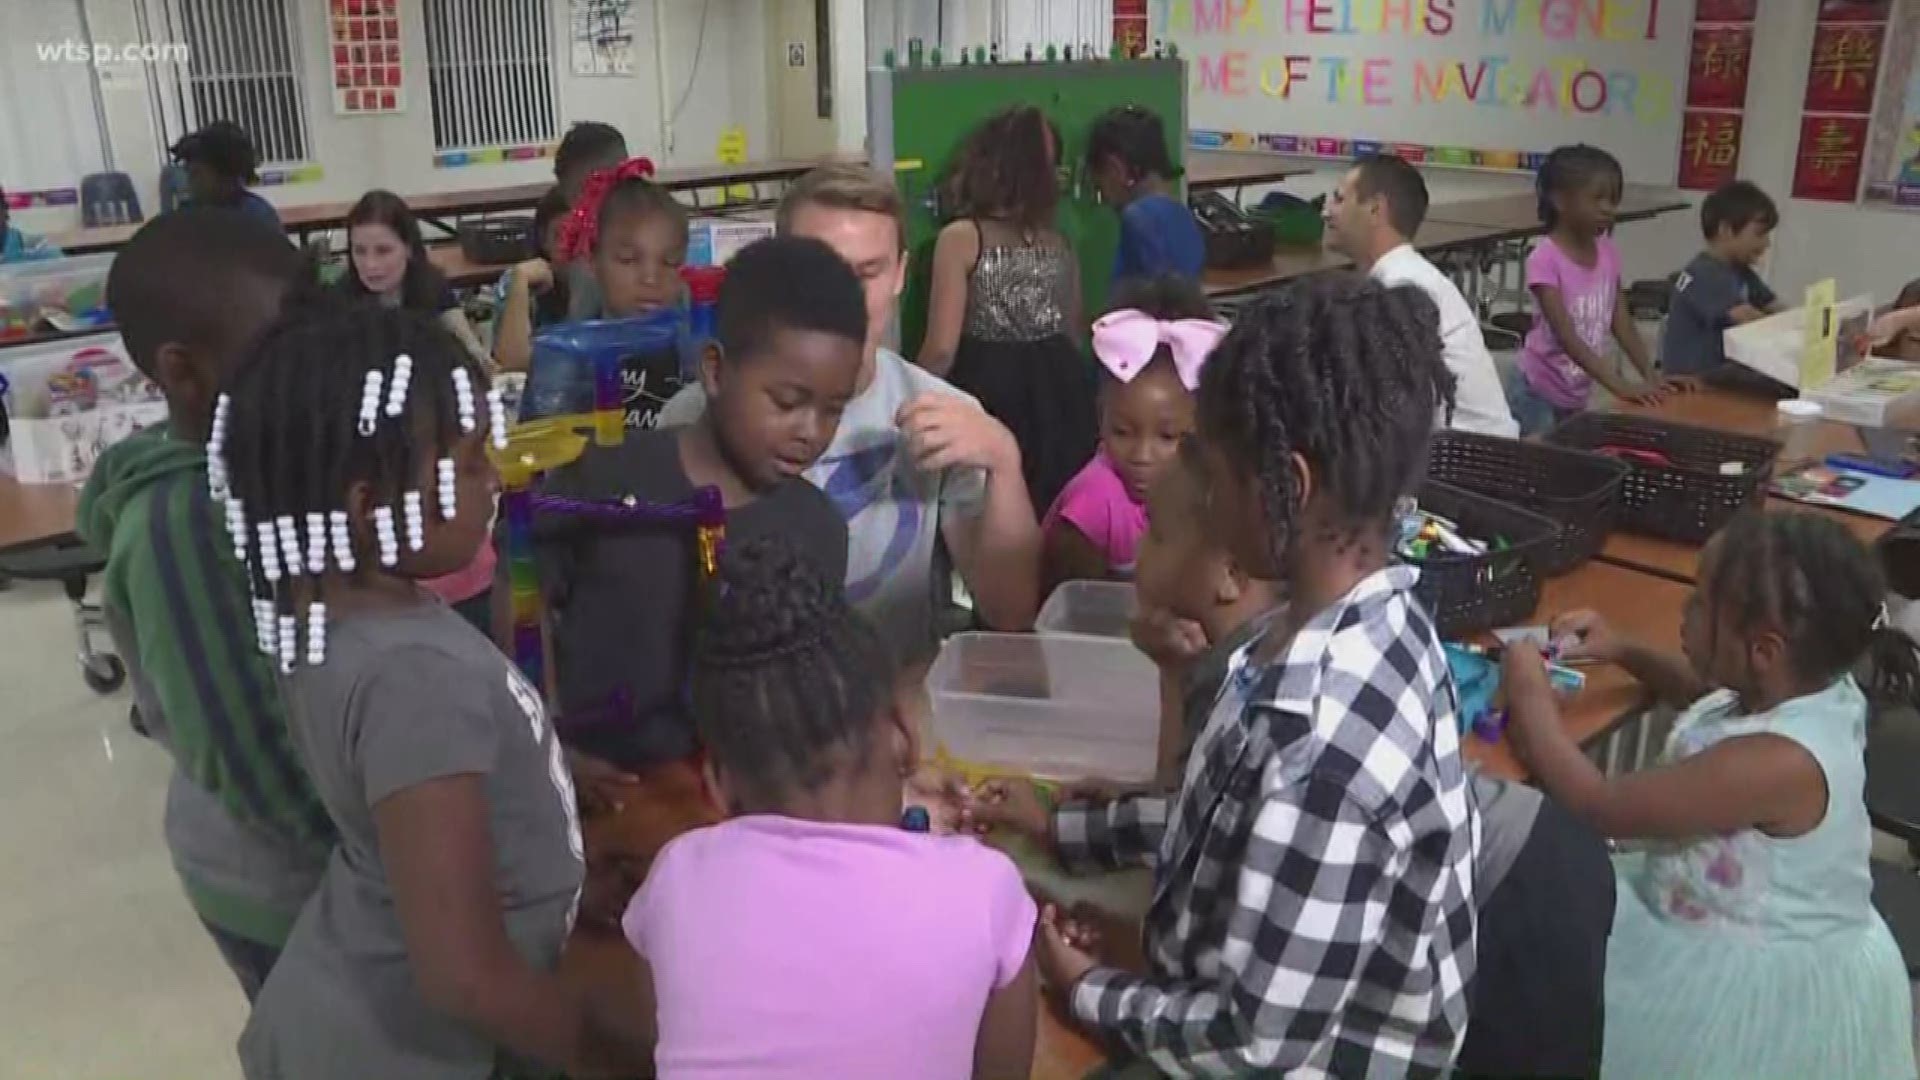 Congrats to the students, teachers and staff at Tampa Heights Elementary Magnet. https://on.wtsp.com/2Uym6ik